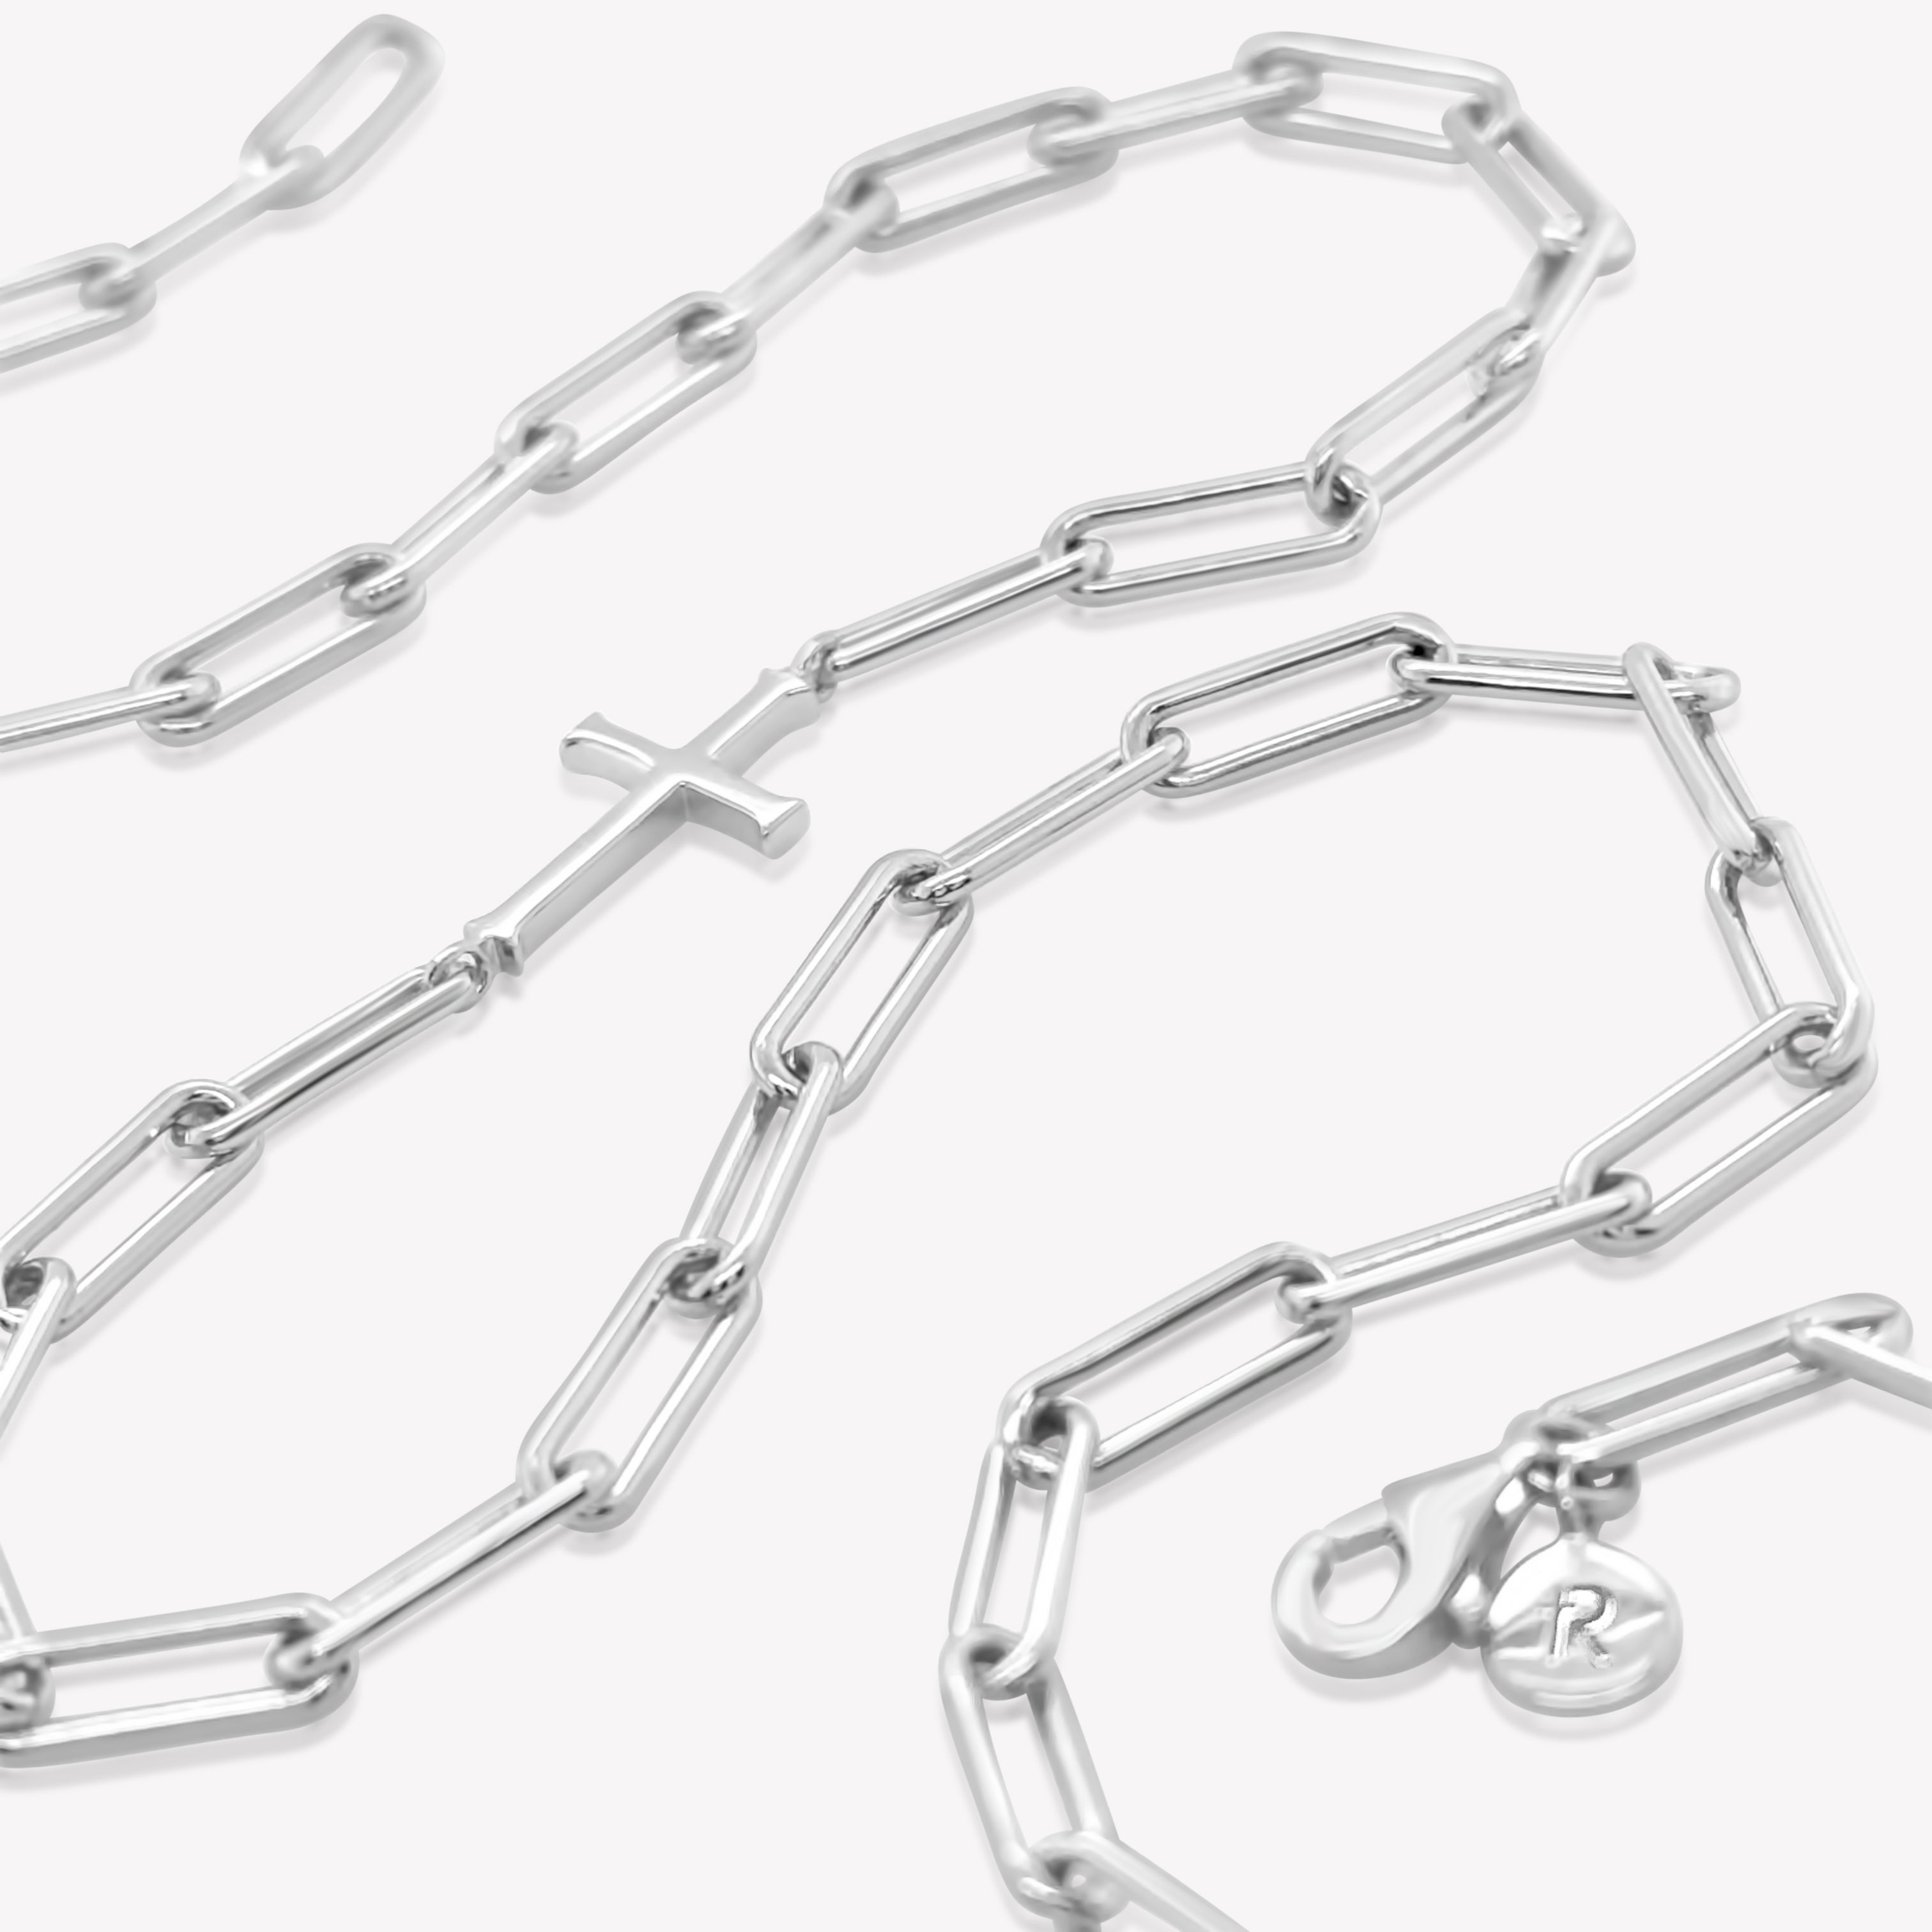 Rizen Jewelry Chain Breaker necklace in sterling silver.  Elegant Cross Pendant breaks up the paper clip link chain with classic lobster clasp  closure.